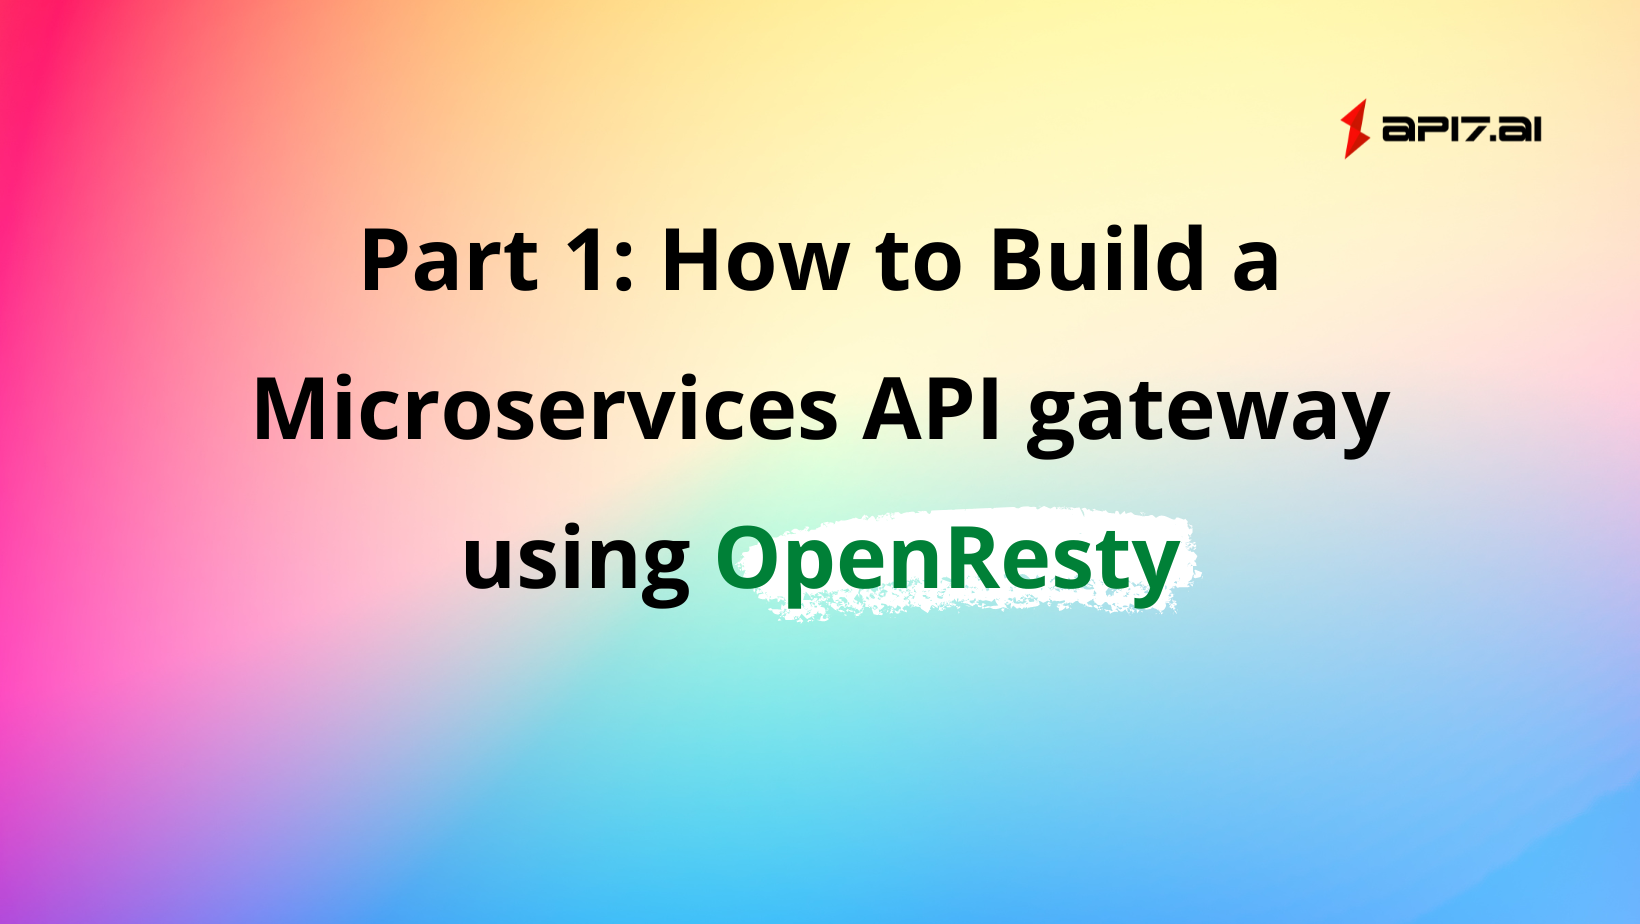 Part 1: How to Build a Microservices API gateway using OpenResty